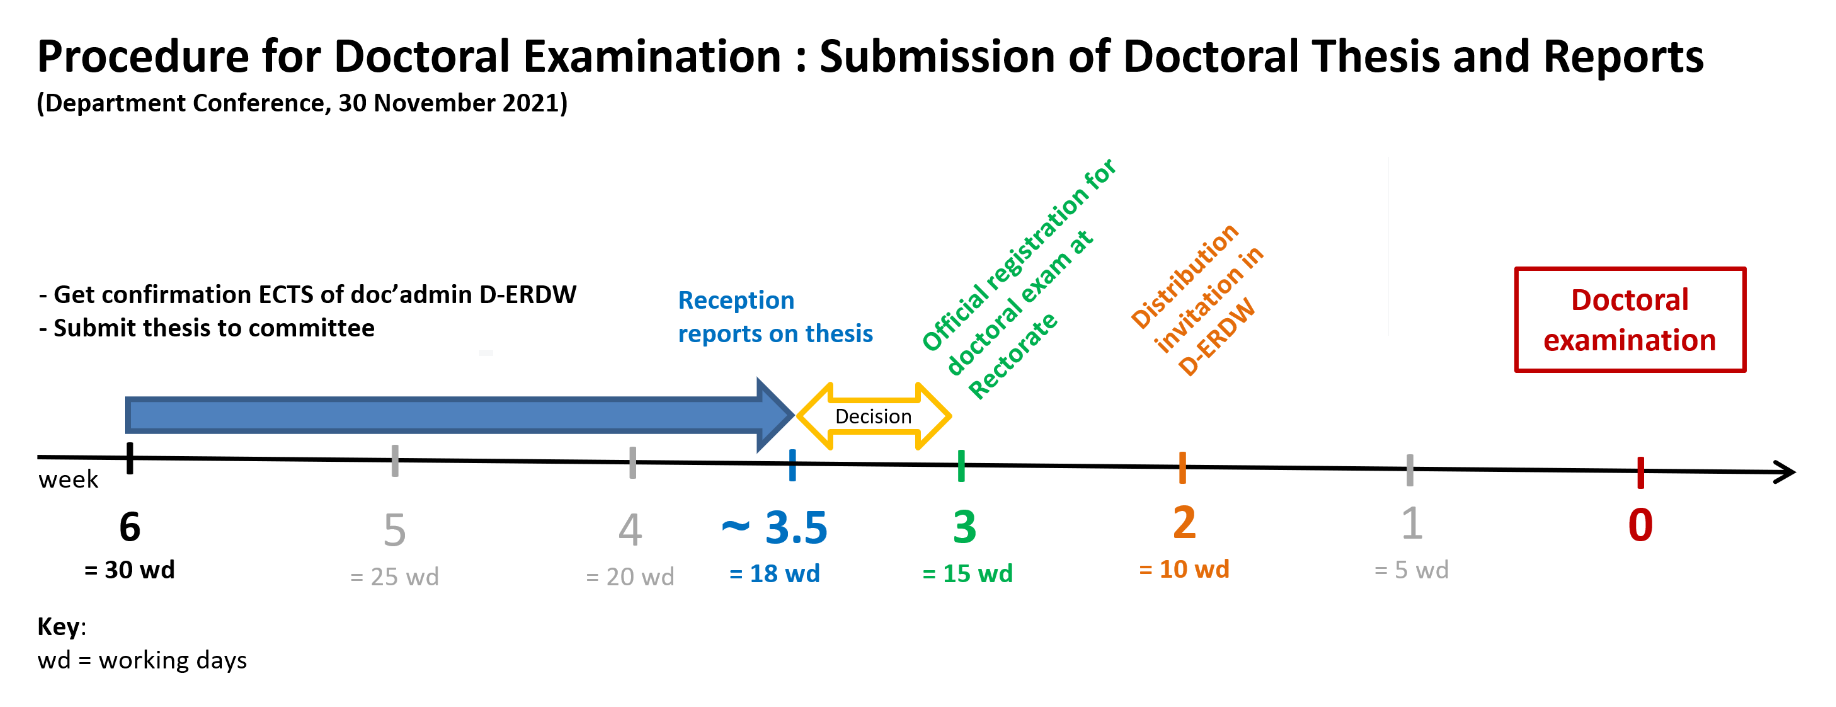 Enlarged view: New Procedure for Doctoral Examination